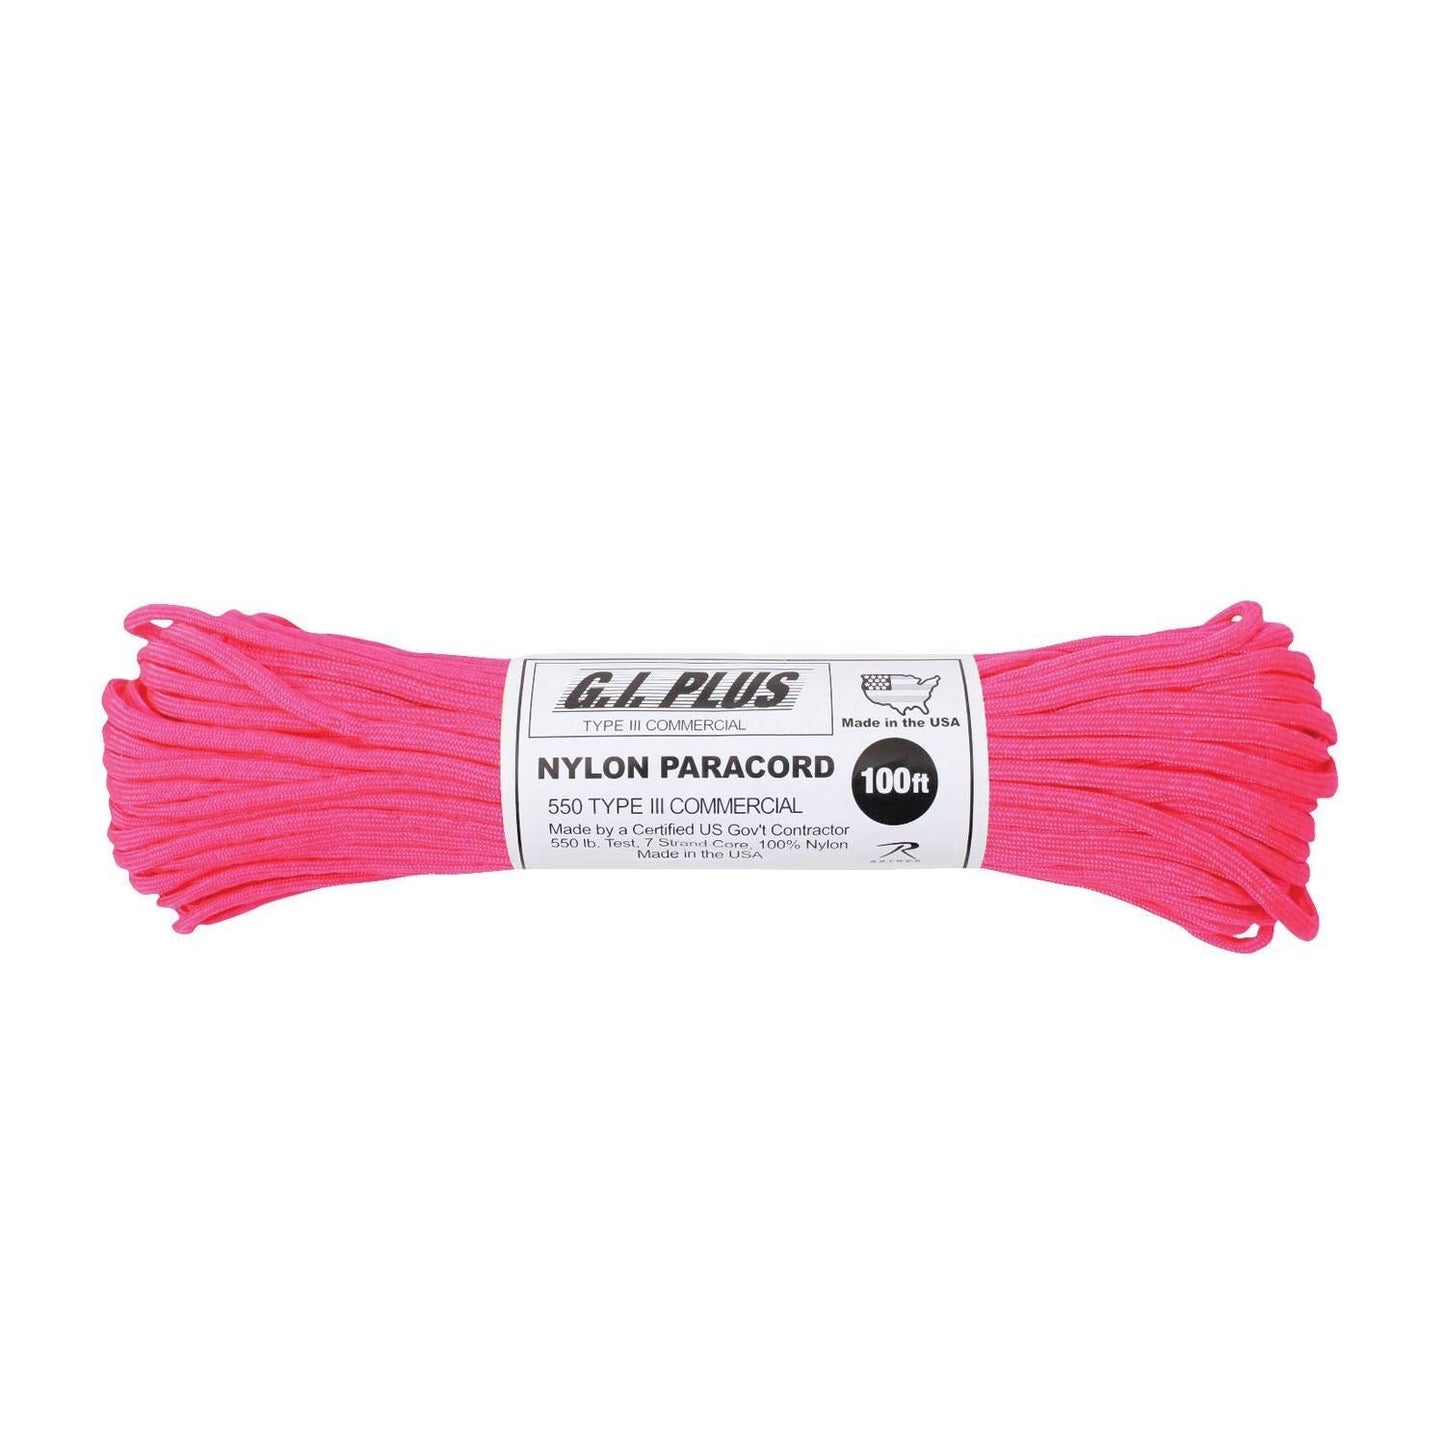 Nylon Paracord Type III 550 LB 100 FT Color : Neon Pink (5 per pack)